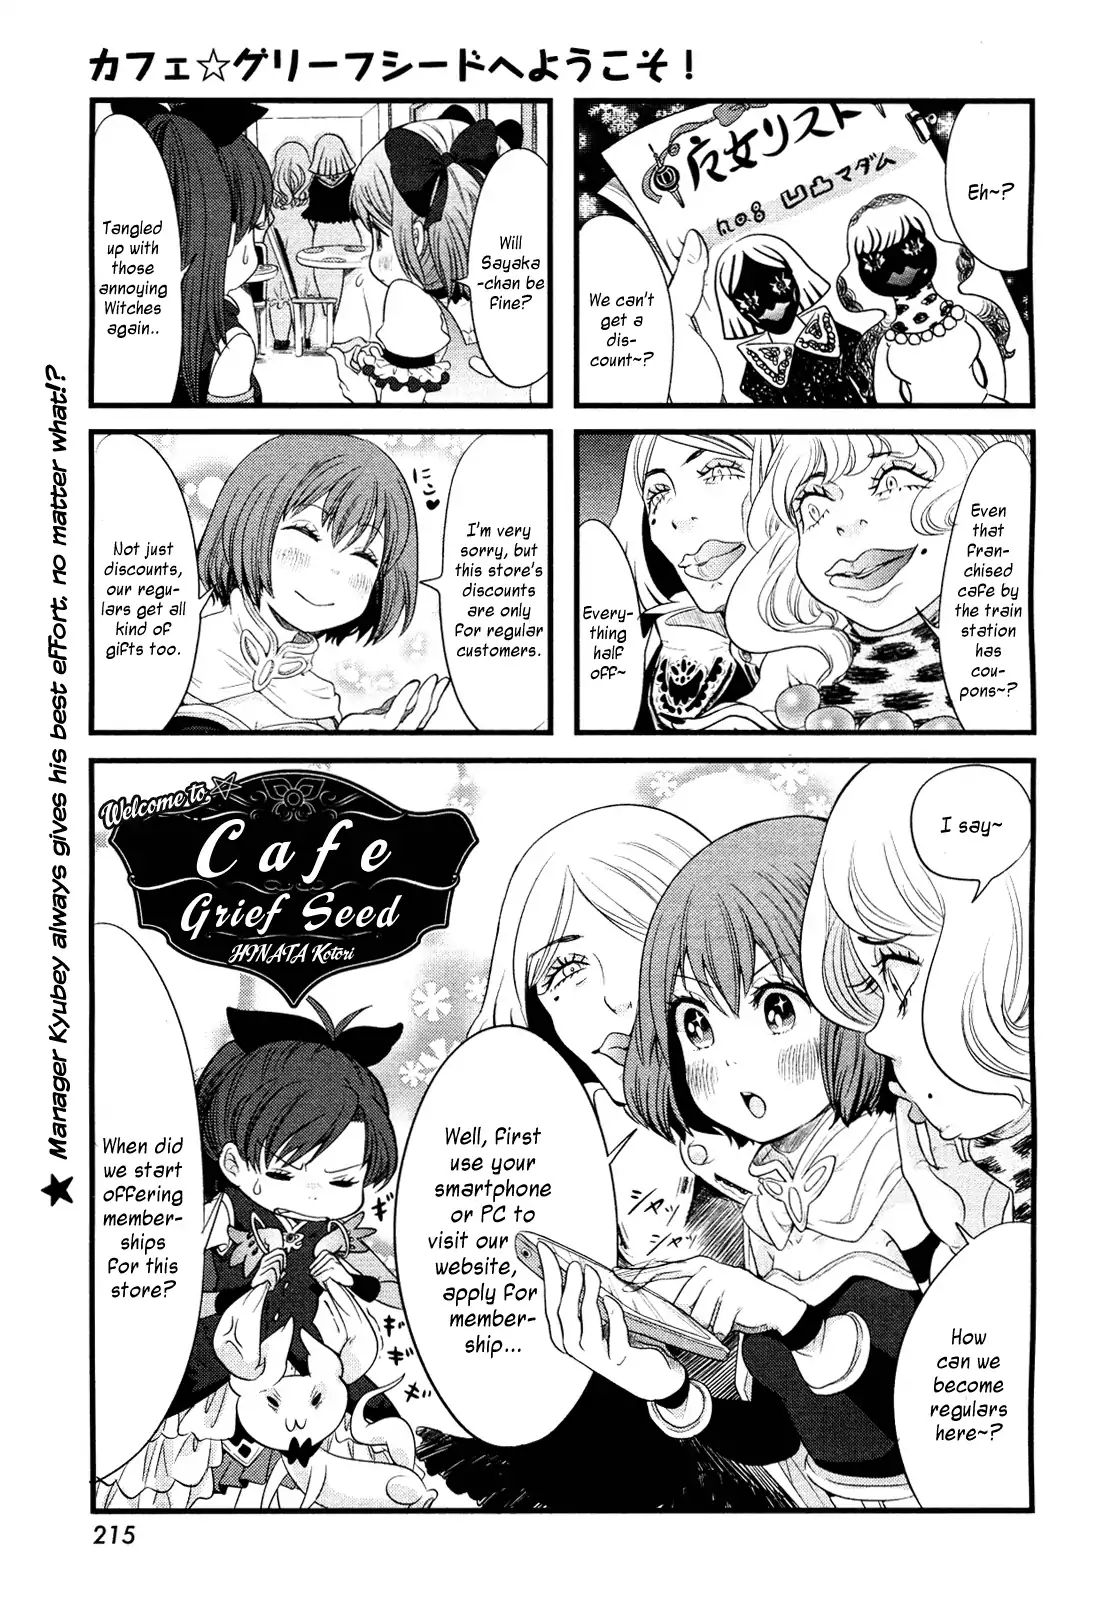 Welcome To Café Grief Seed! - Page 1